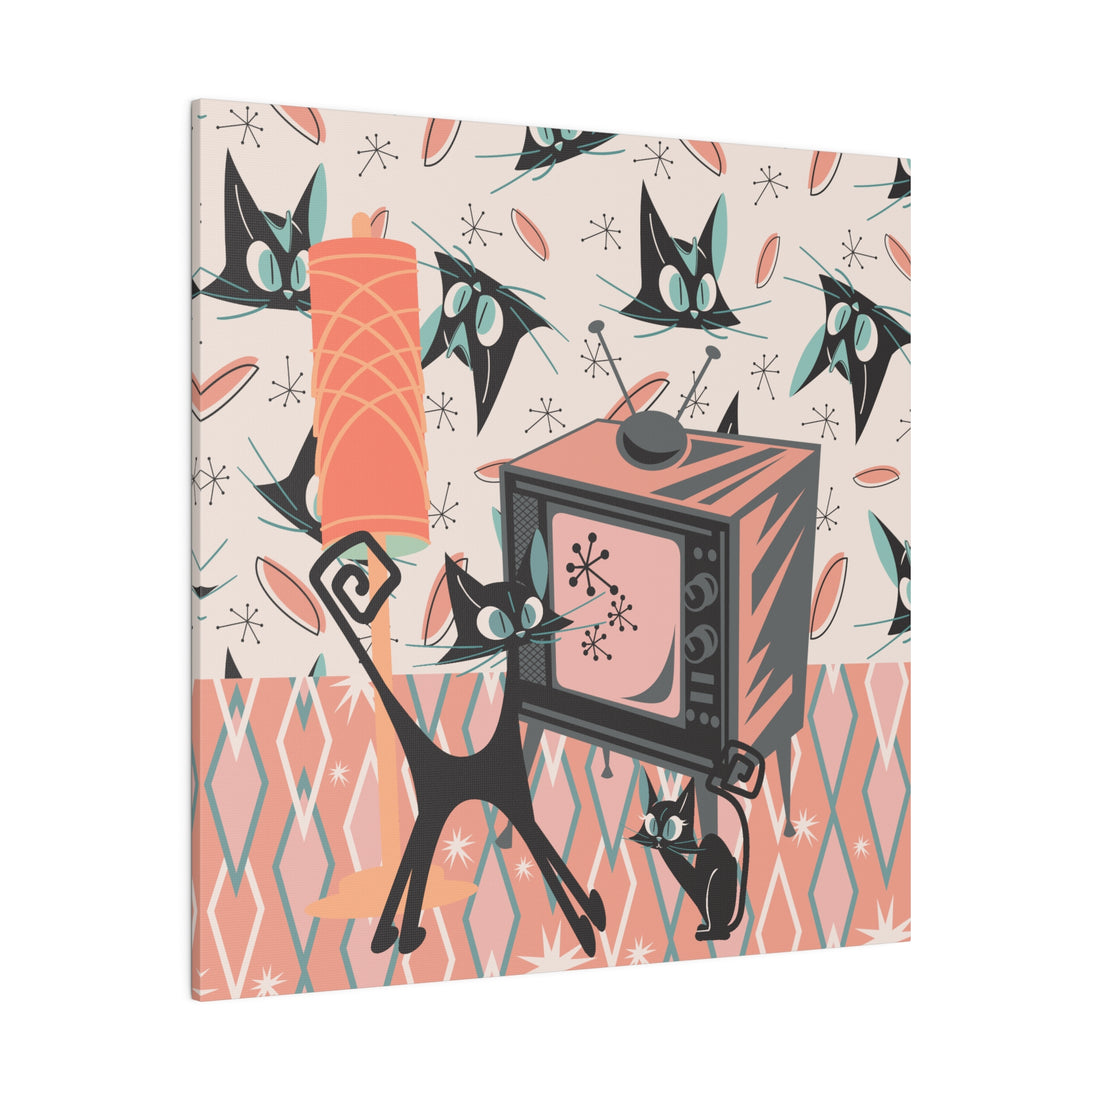 Atomic Cat Art, Quirky, Kitschy Whimsical Kittie Lover, Retro TV, Coral, Peach, Teal Blue, Mid Century Modern Wall Art